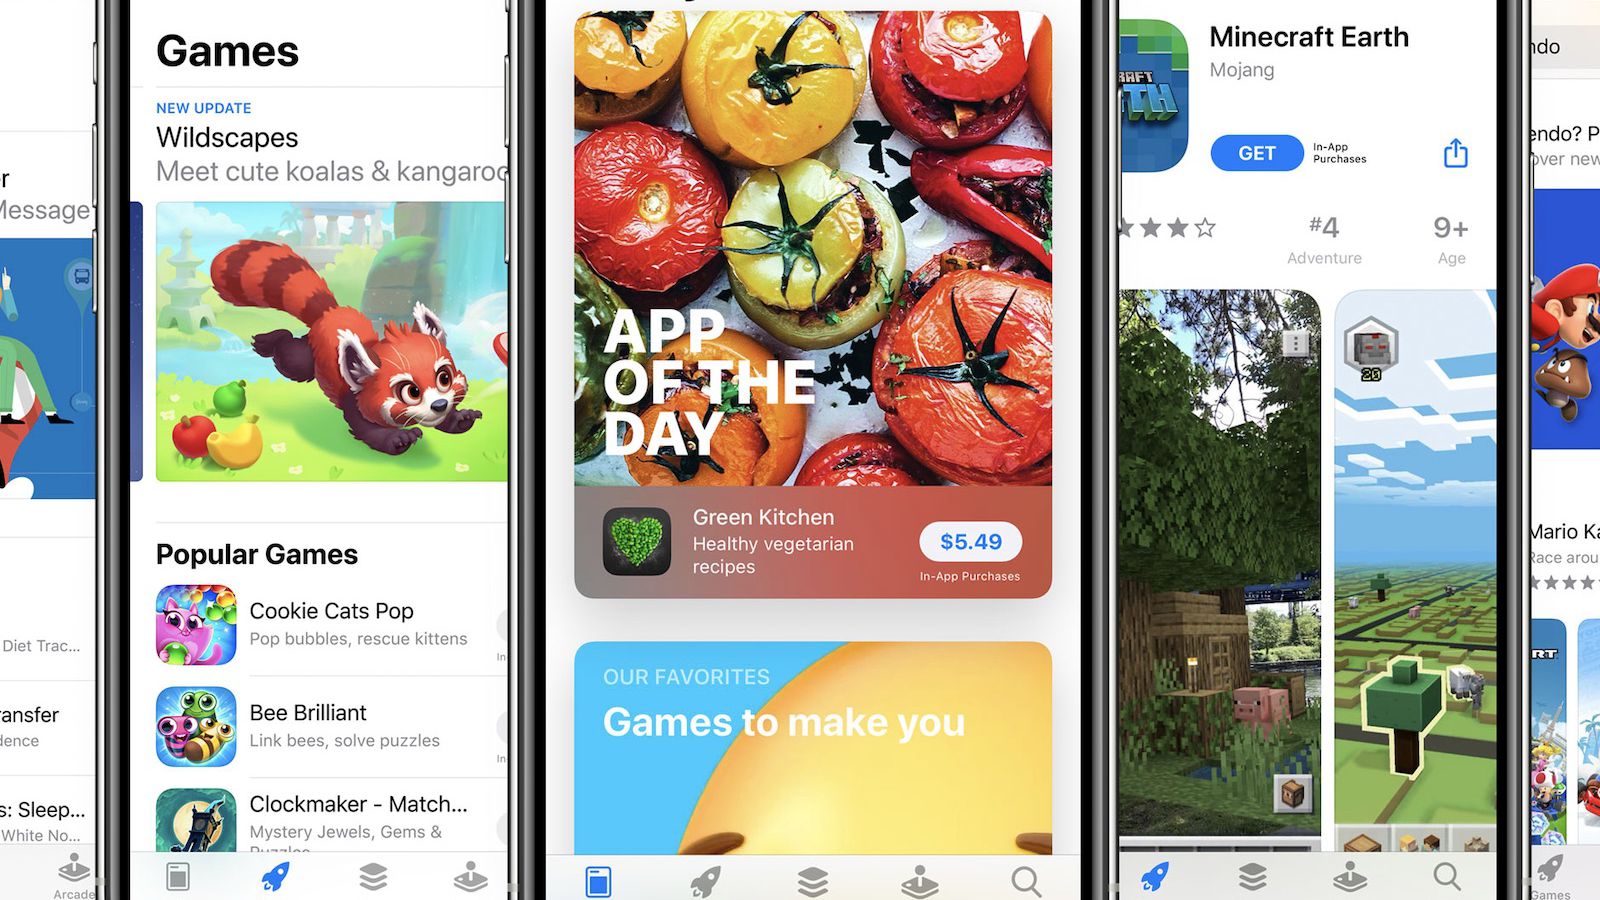 Apple Will Allow Developers to 'Challenge' App Store Review Guidelines  Starting This Summer - MacRumors